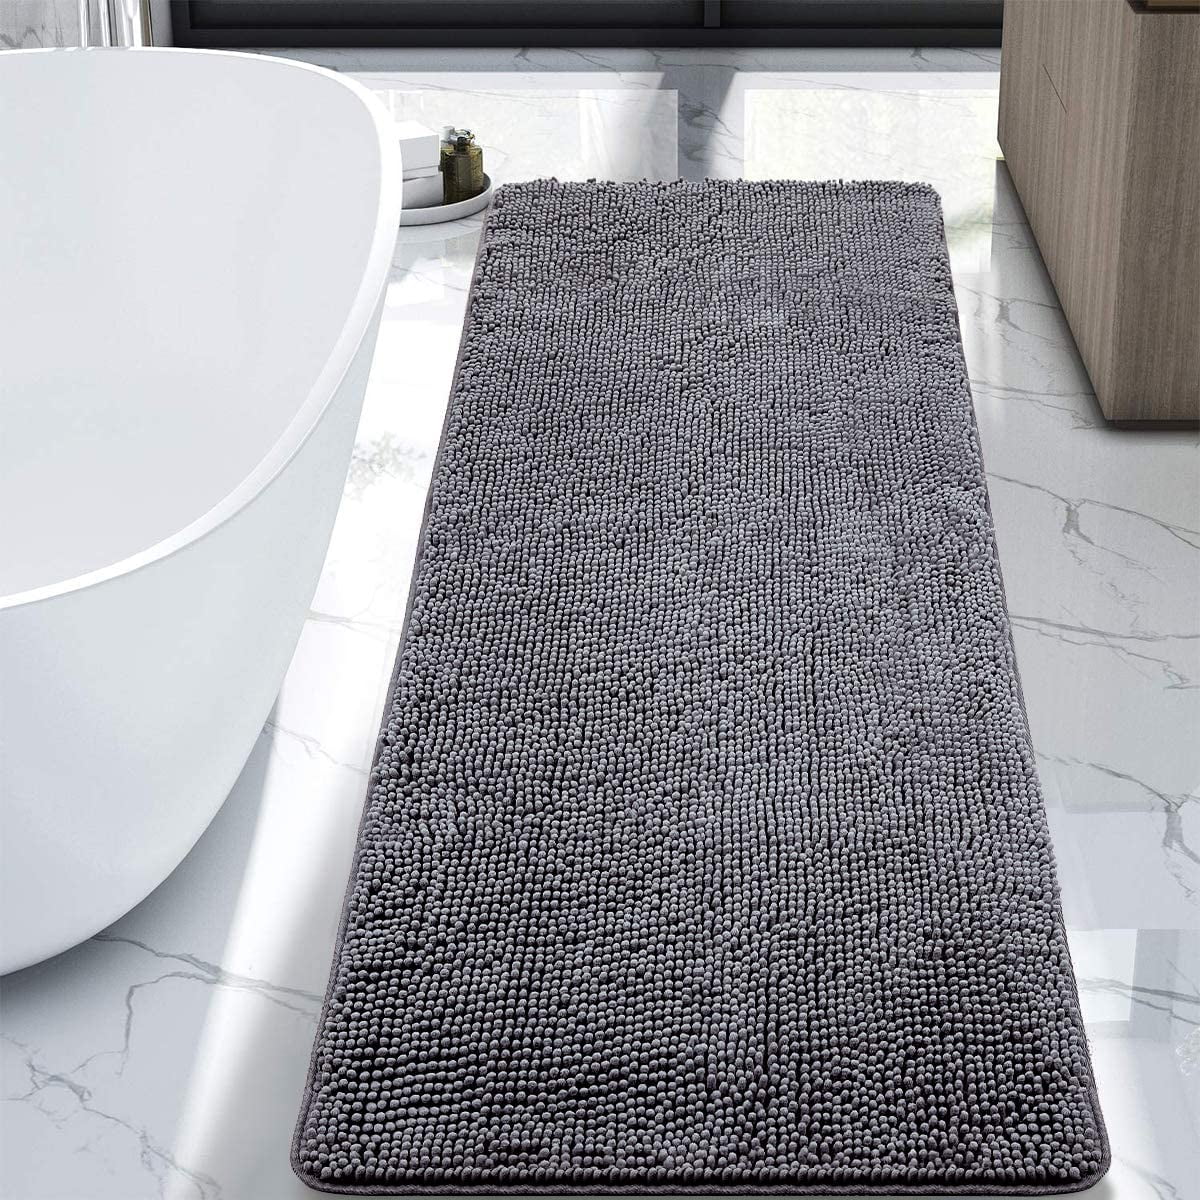 Bath Room Tub Bath Mats for Bathroom Non Slip Luxury Chenille Ultra Soft Bath Rugs 24x36 Absorbent Non Skid Shaggy Rugs Washable Dry Fast Plush Area Carpet Mats for Indoor Pure White